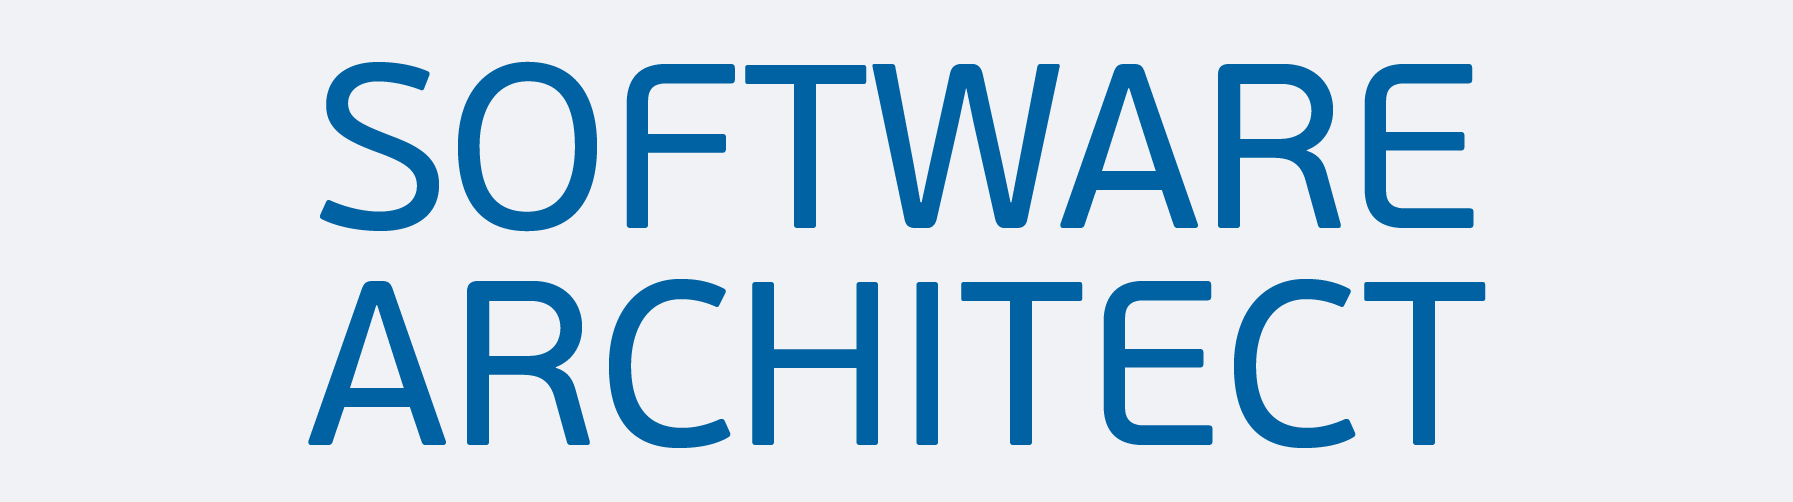 SOFTWARE ARCHITECT-02.png